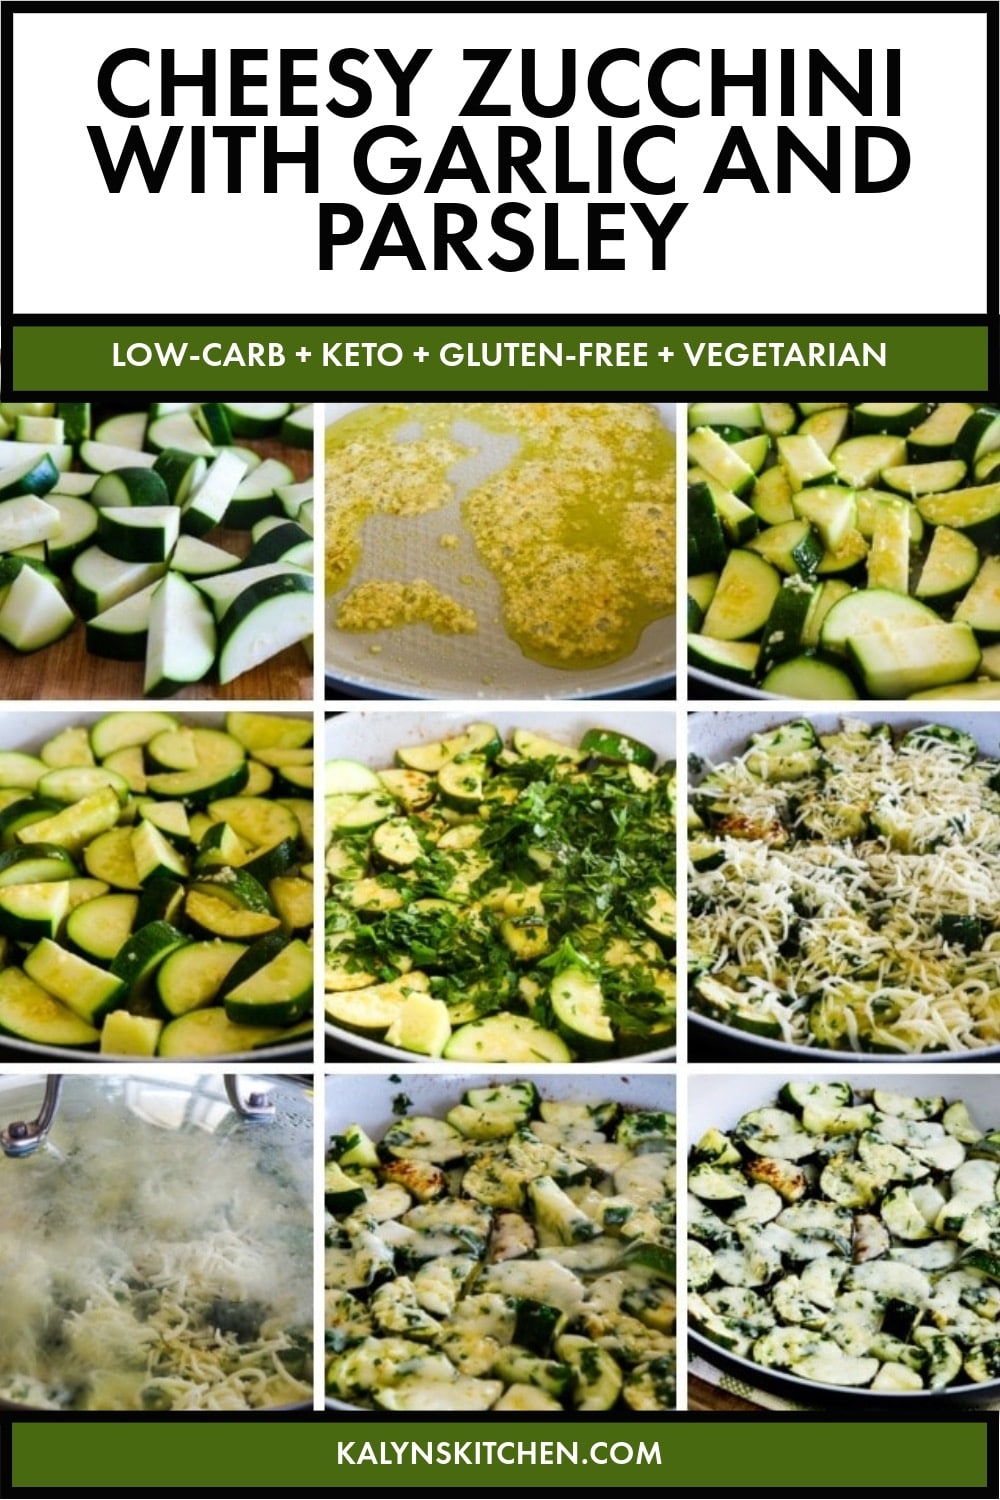 Pinterest image of Cheesy Zucchini with Garlic and Parsley